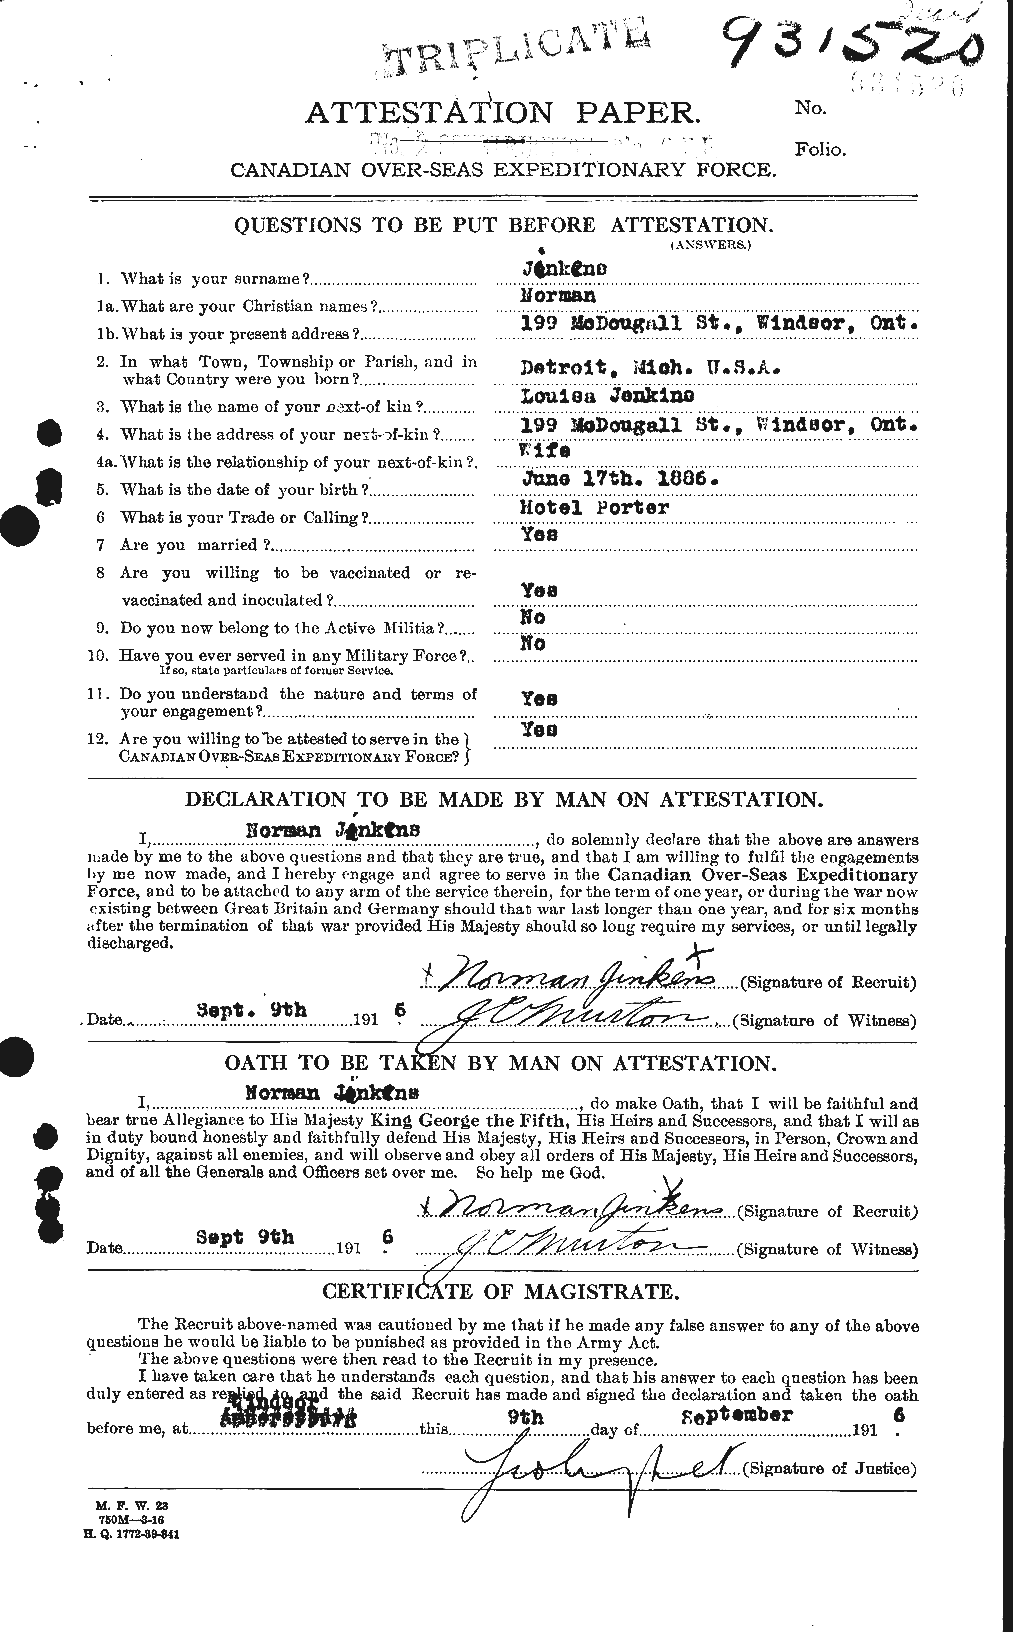 Personnel Records of the First World War - CEF 691456a